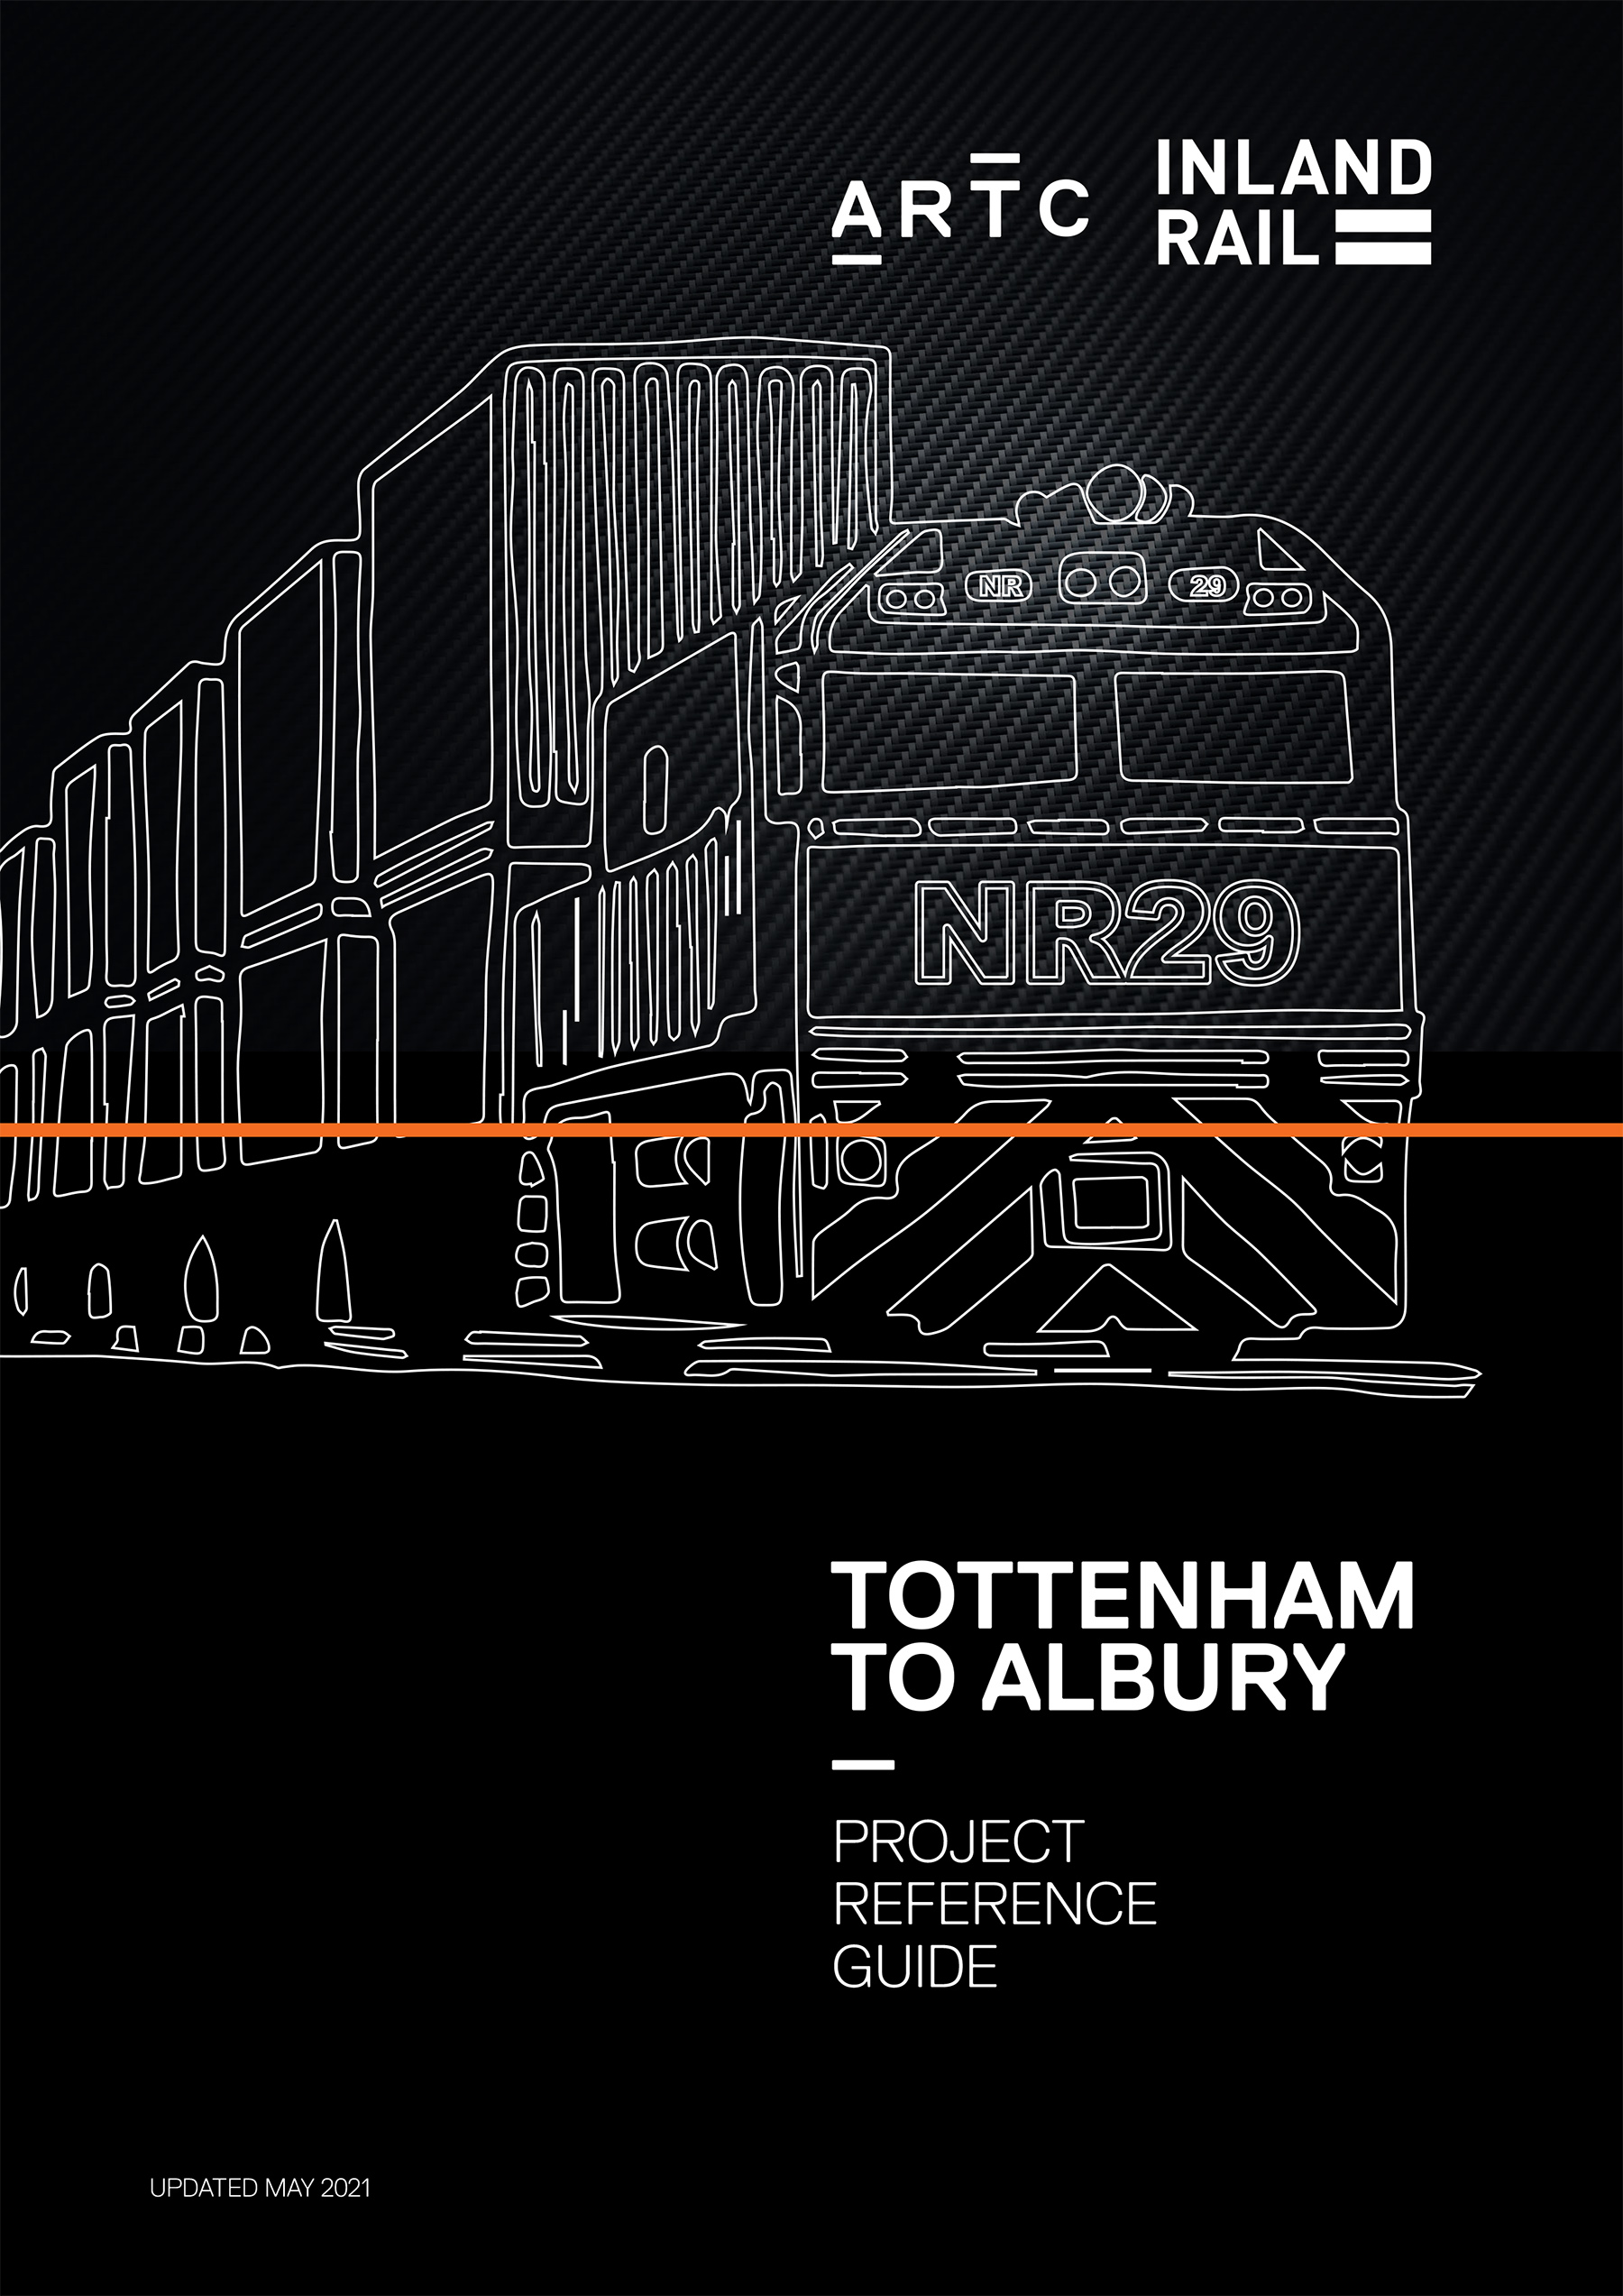 Tottenham to Albury project reference guide